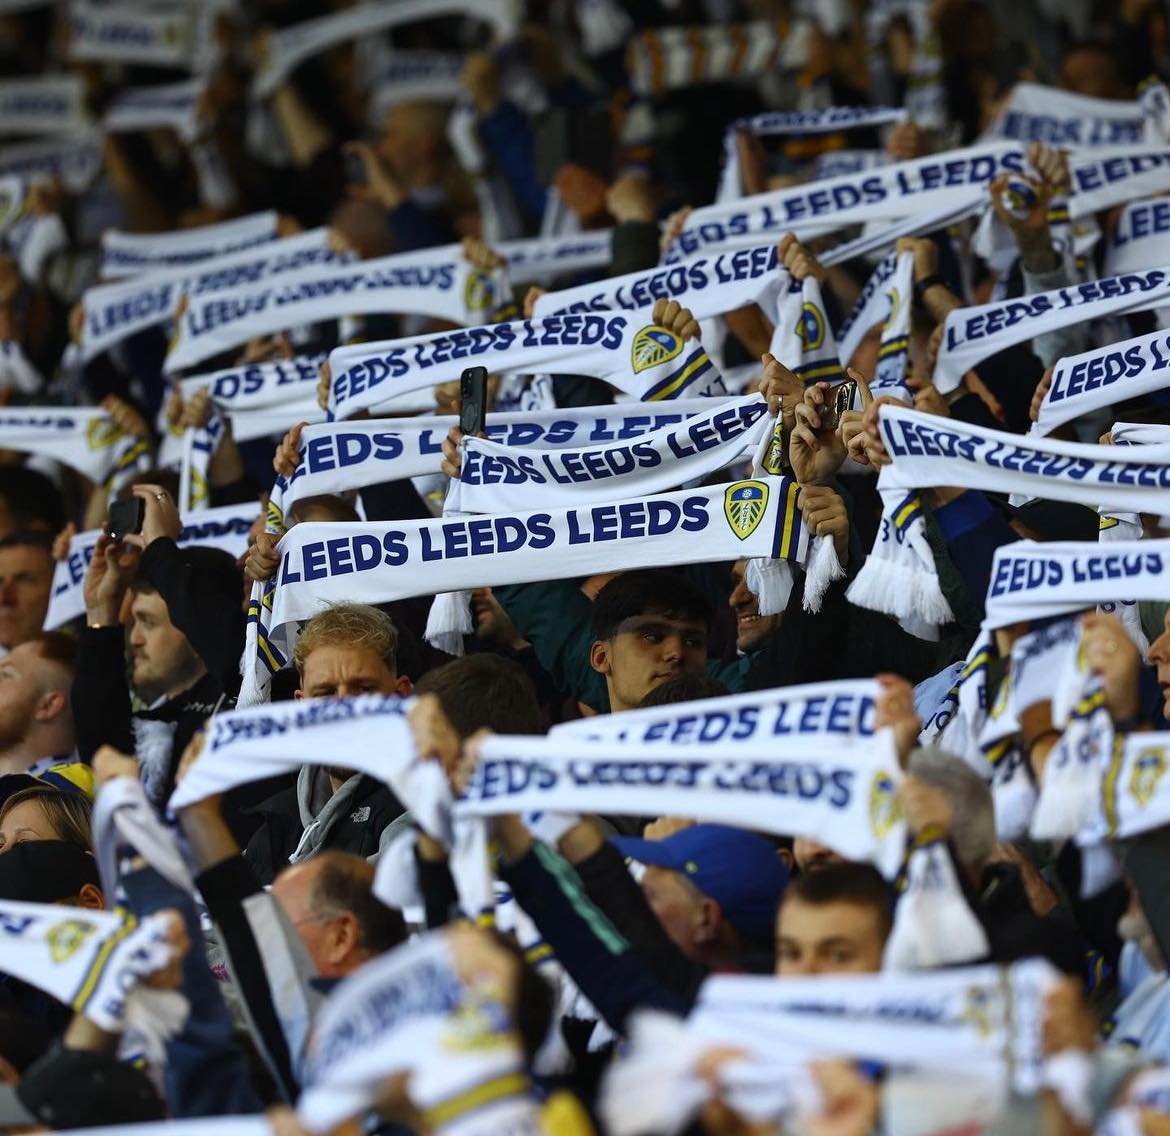 We&rsquo;re the famous Leeds United and we&rsquo;re off to Wembley 🙌💙
#lufc